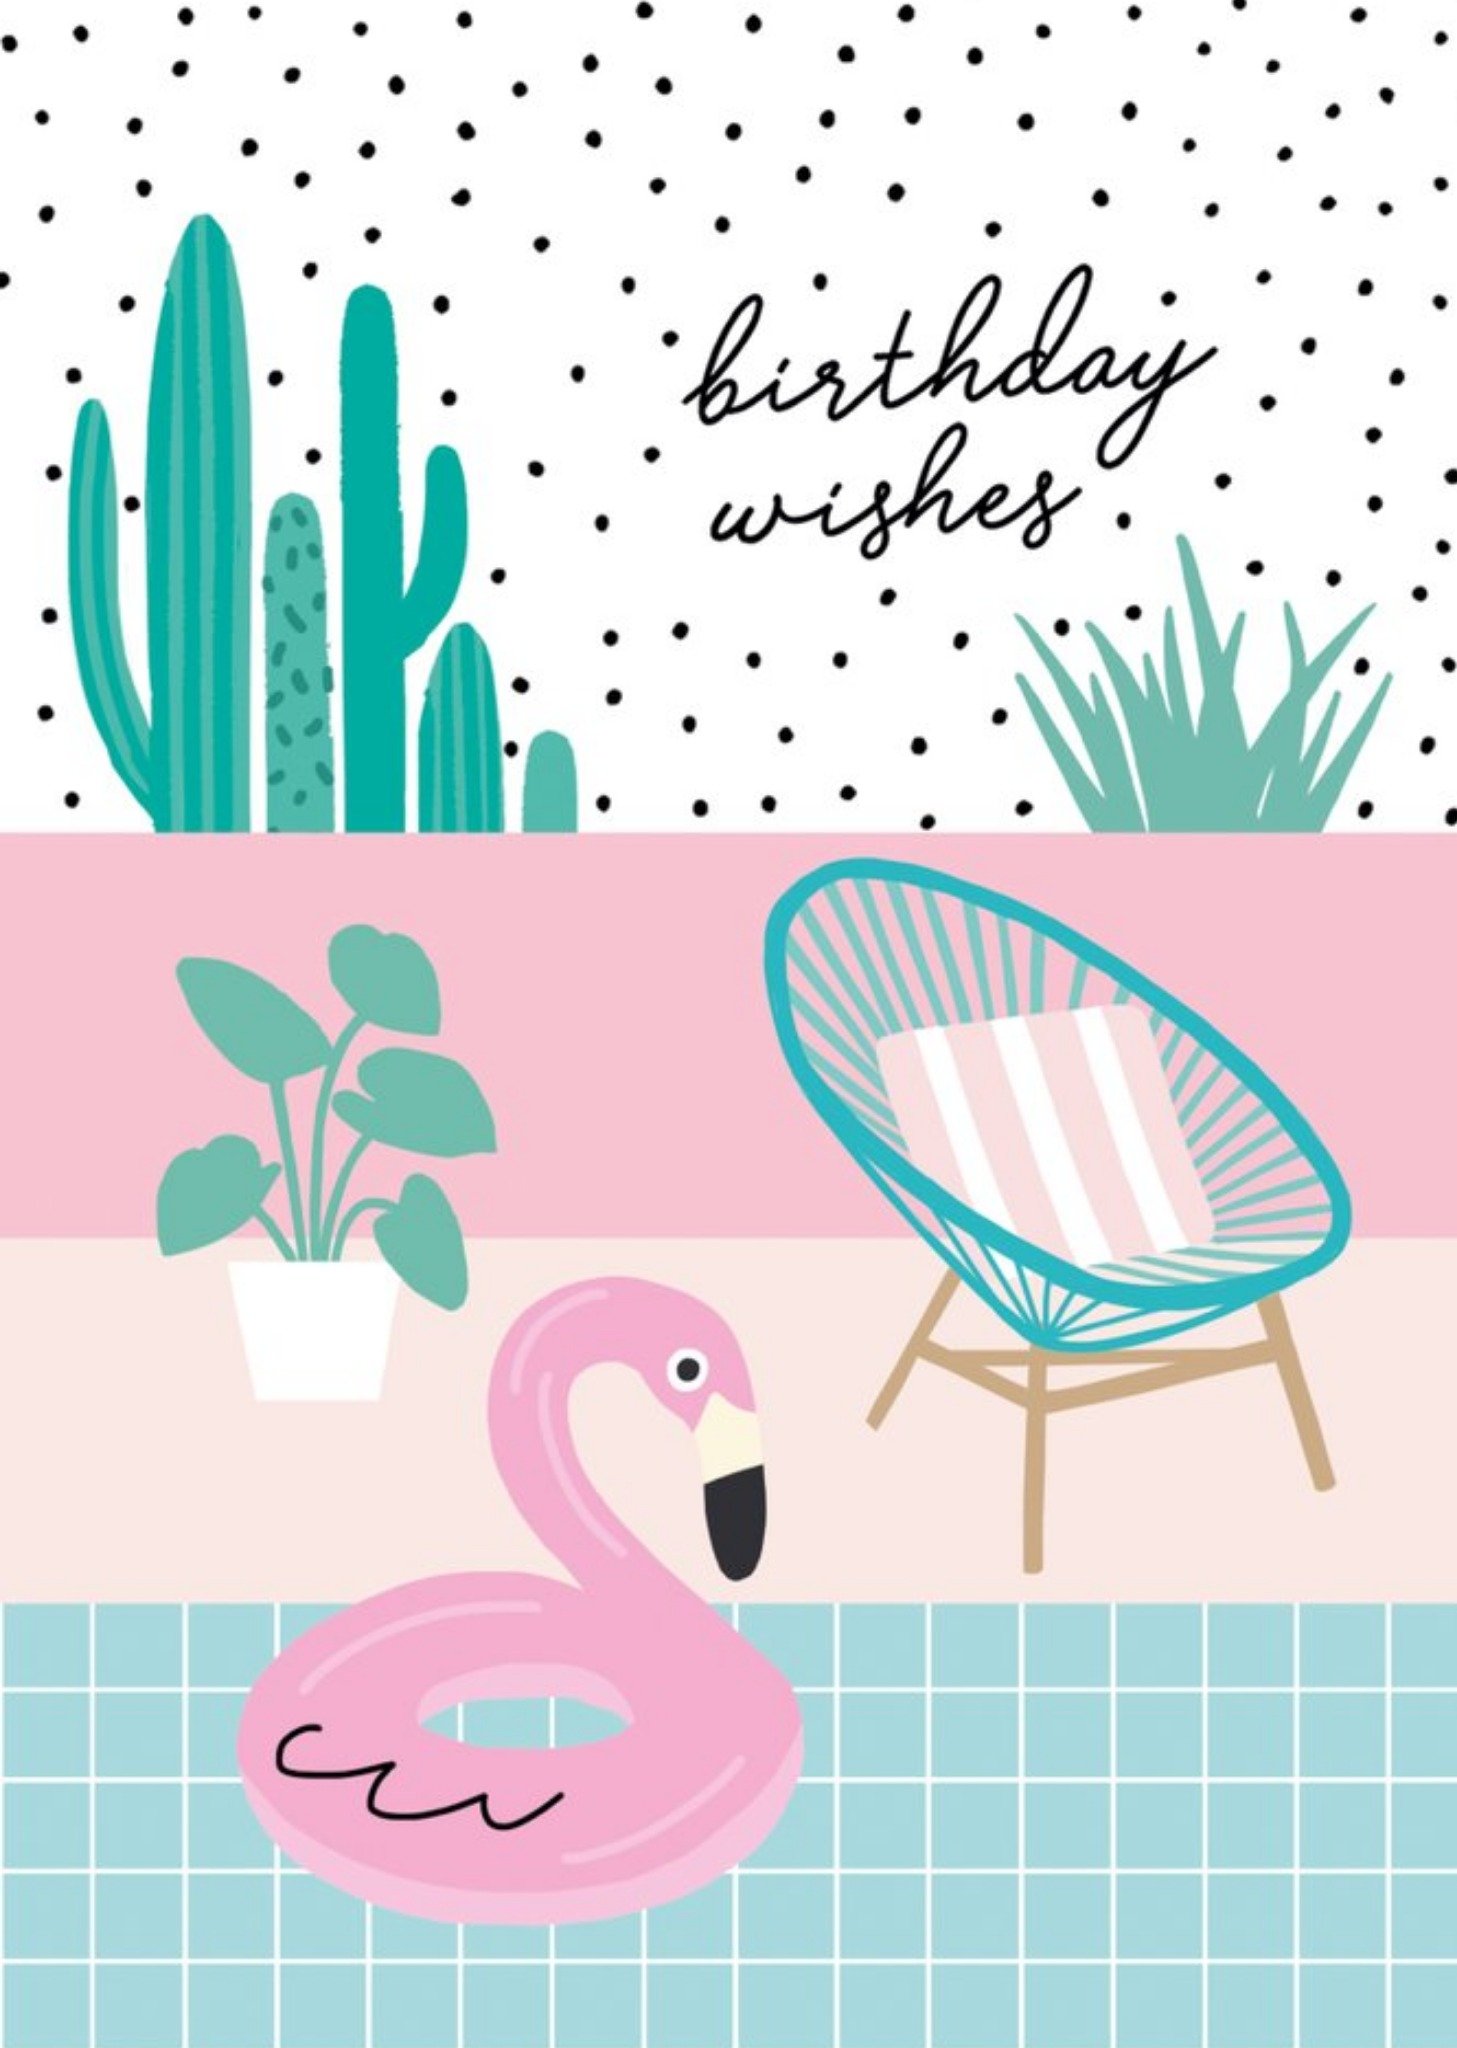 Moonpig Colourful Pool And Flamingo Birthday Wishes Card, Large